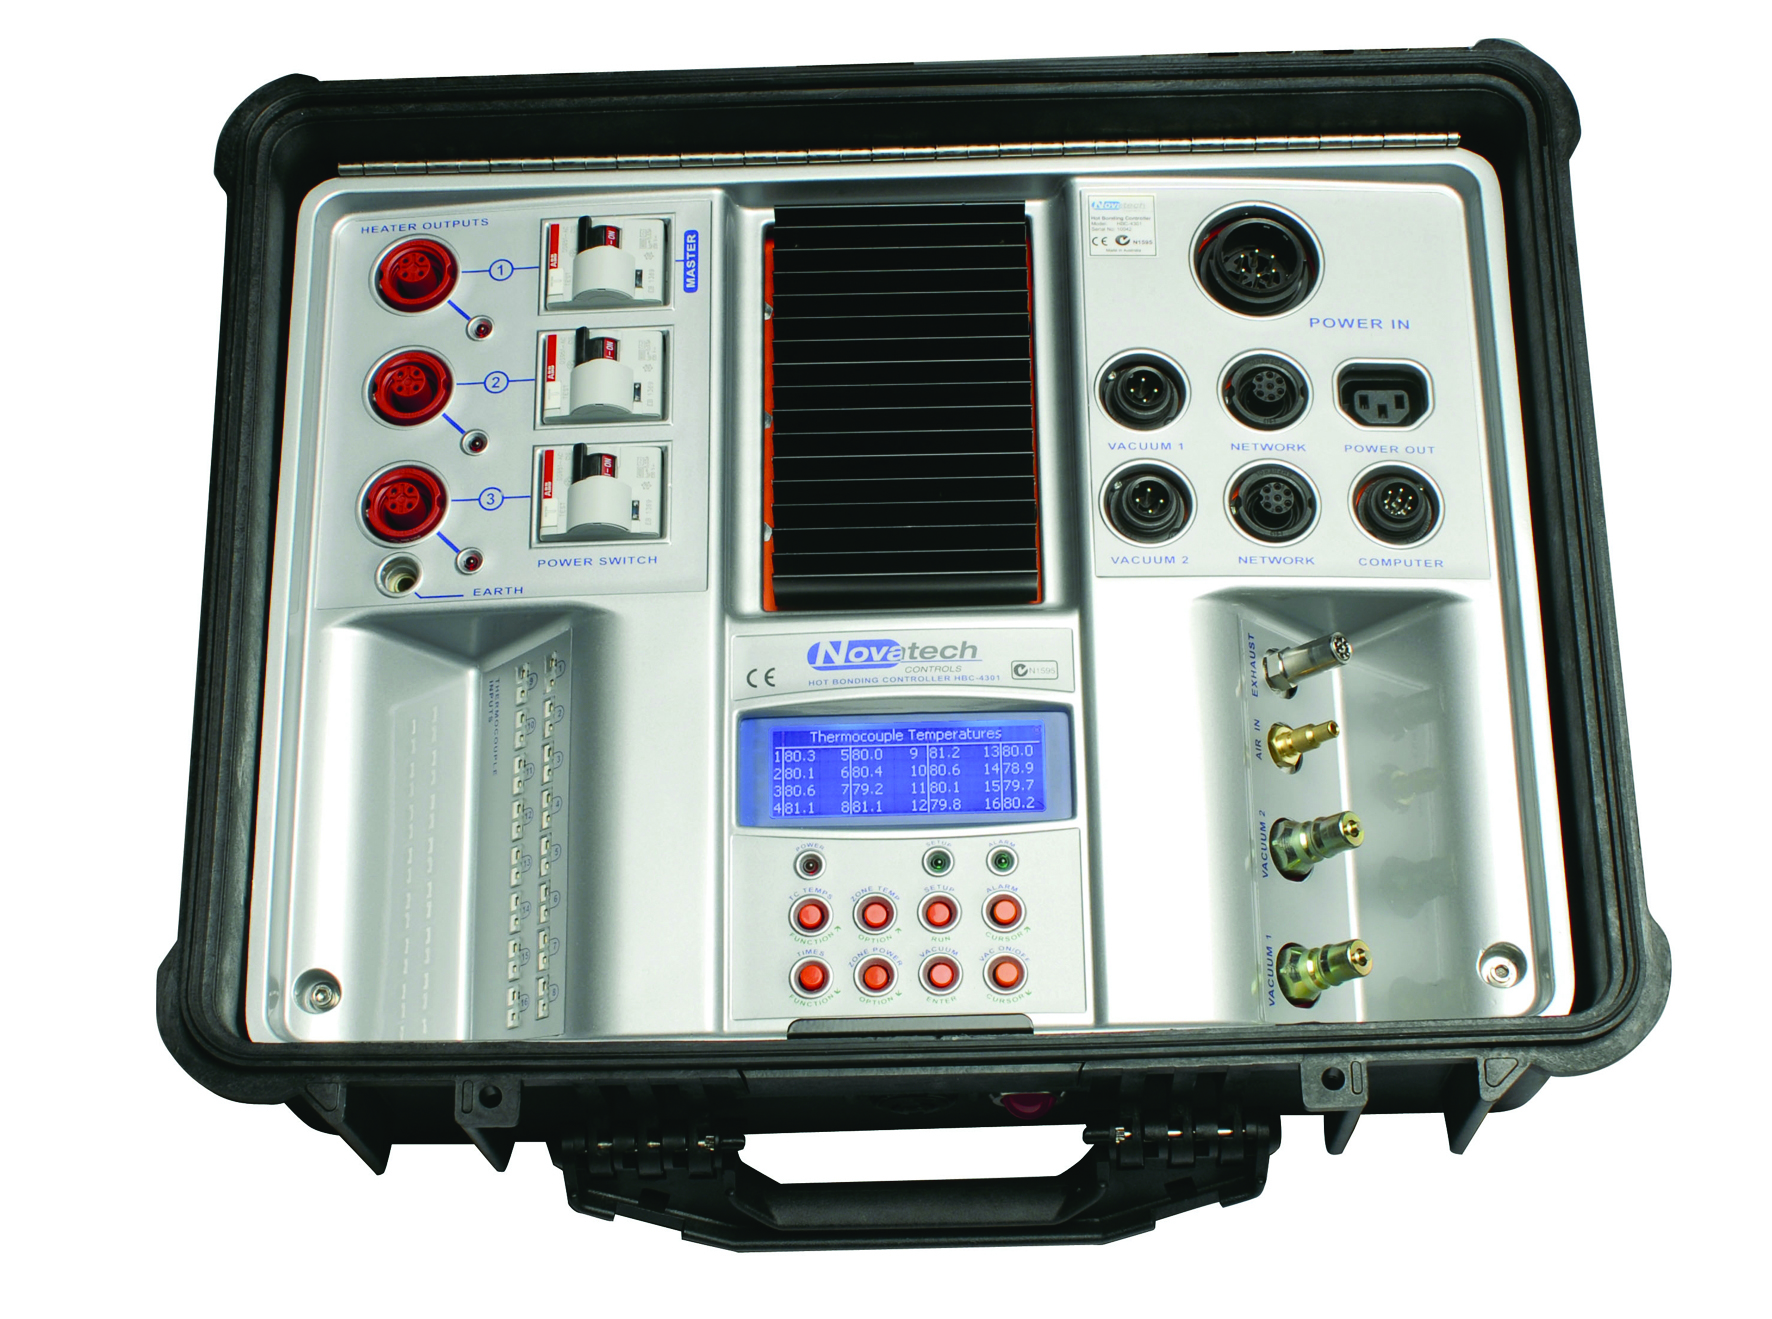 The controllers provide temperature control for the manufacture and repair of adhesive bonded components.